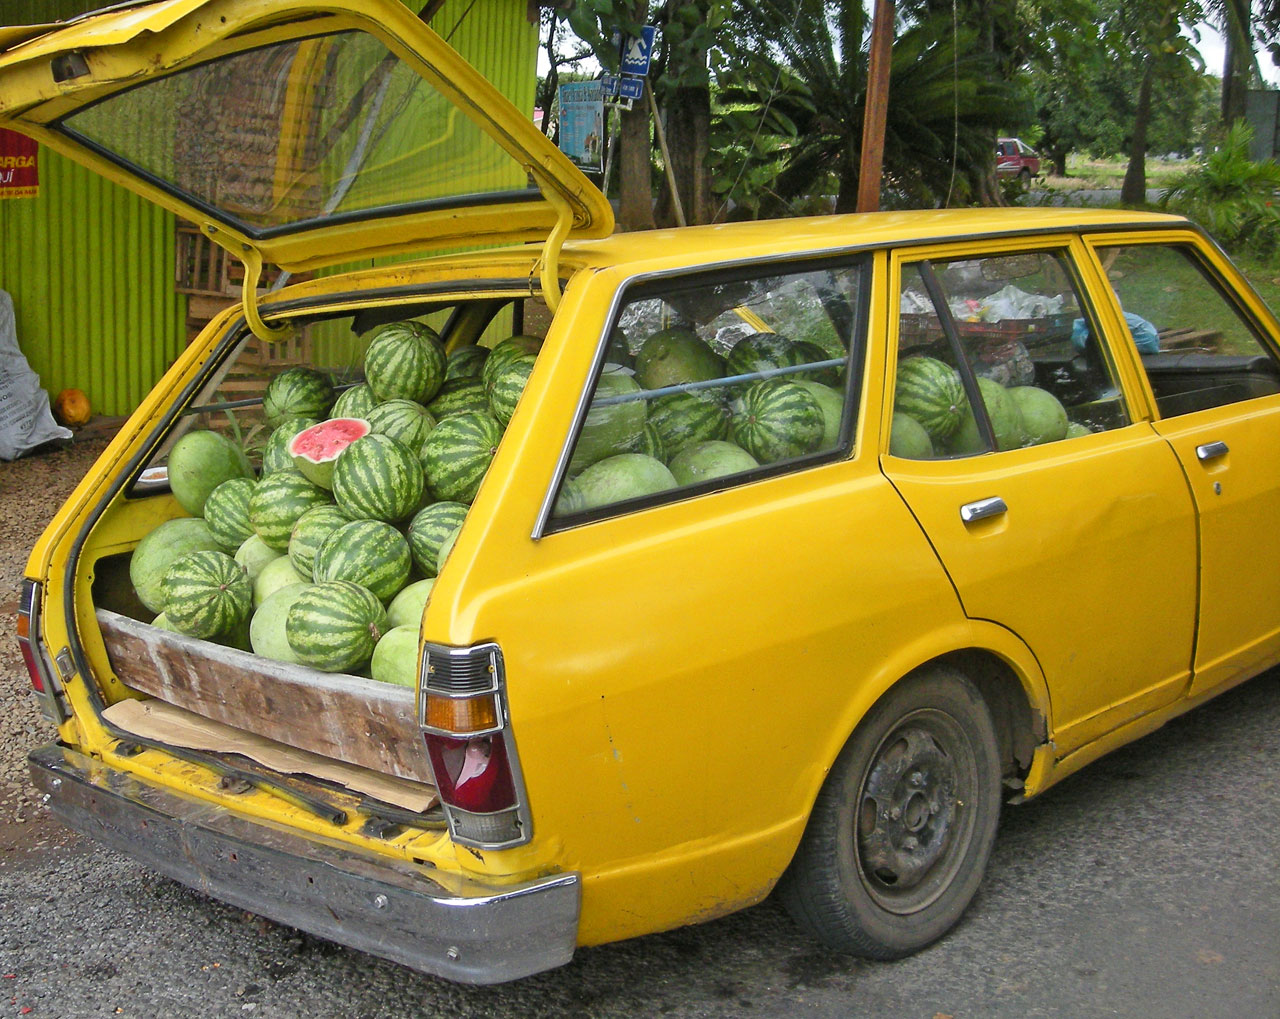 watermelon delivery car free photo